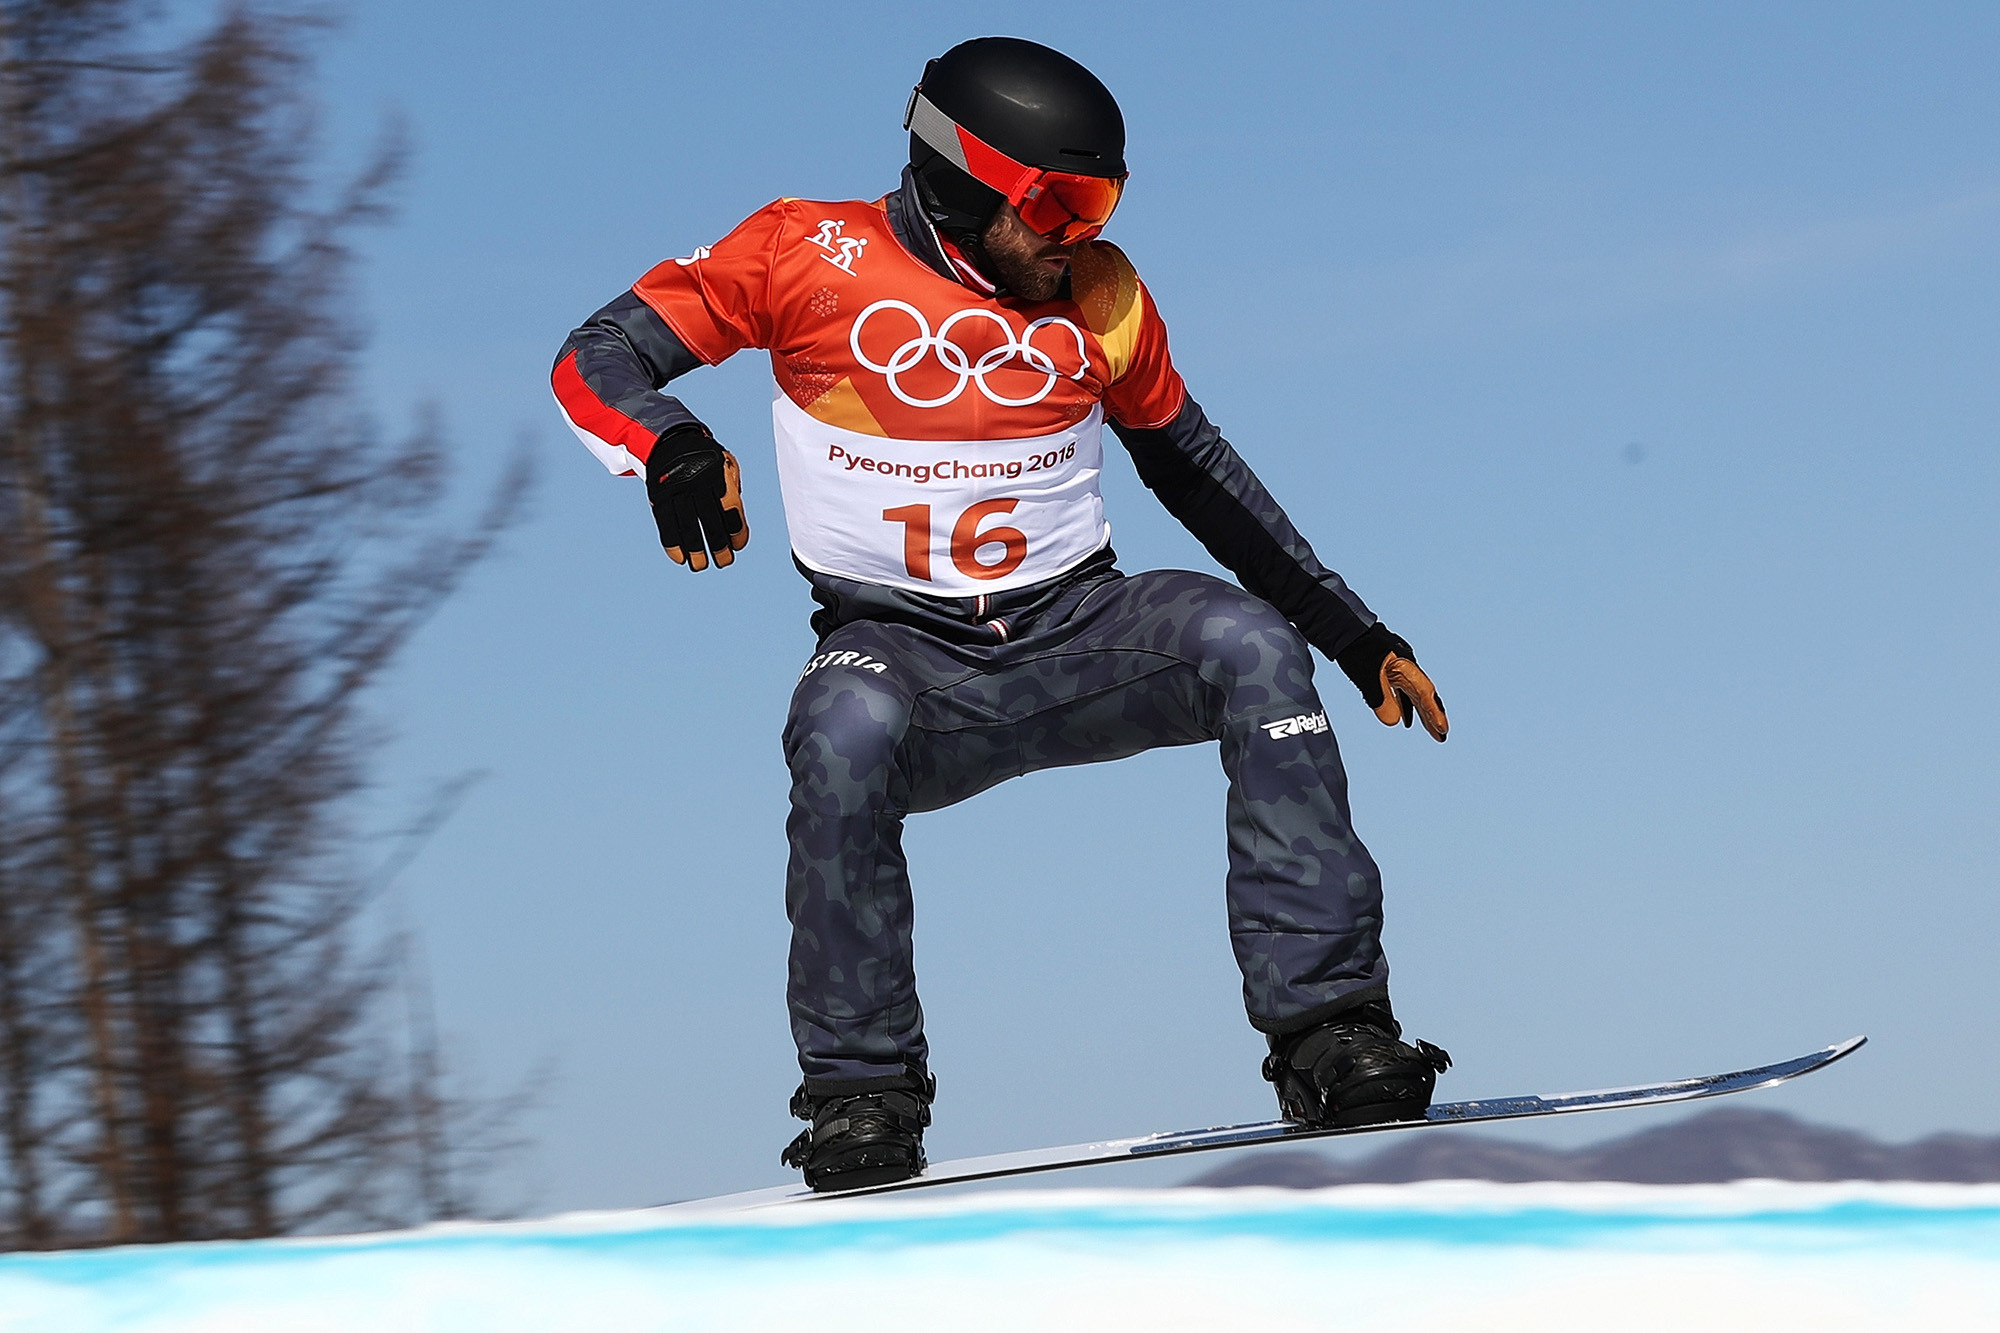 Snowboarder breaks his neck in terrifying crash at Olympics